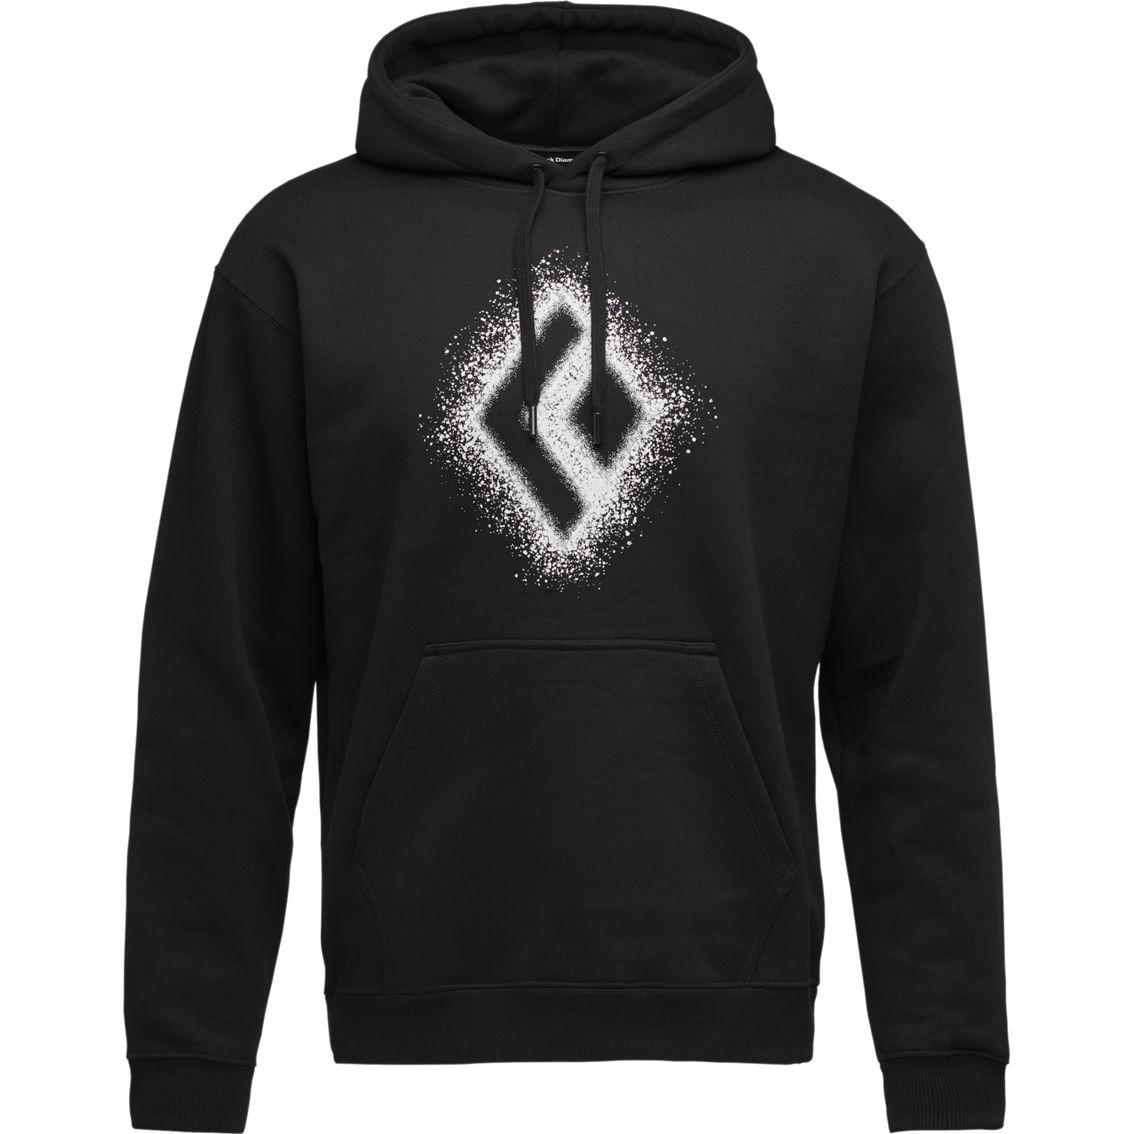 Black Diamond Equipment Chalked Up 2.0 Pullover Hoodie - Image 4 of 4